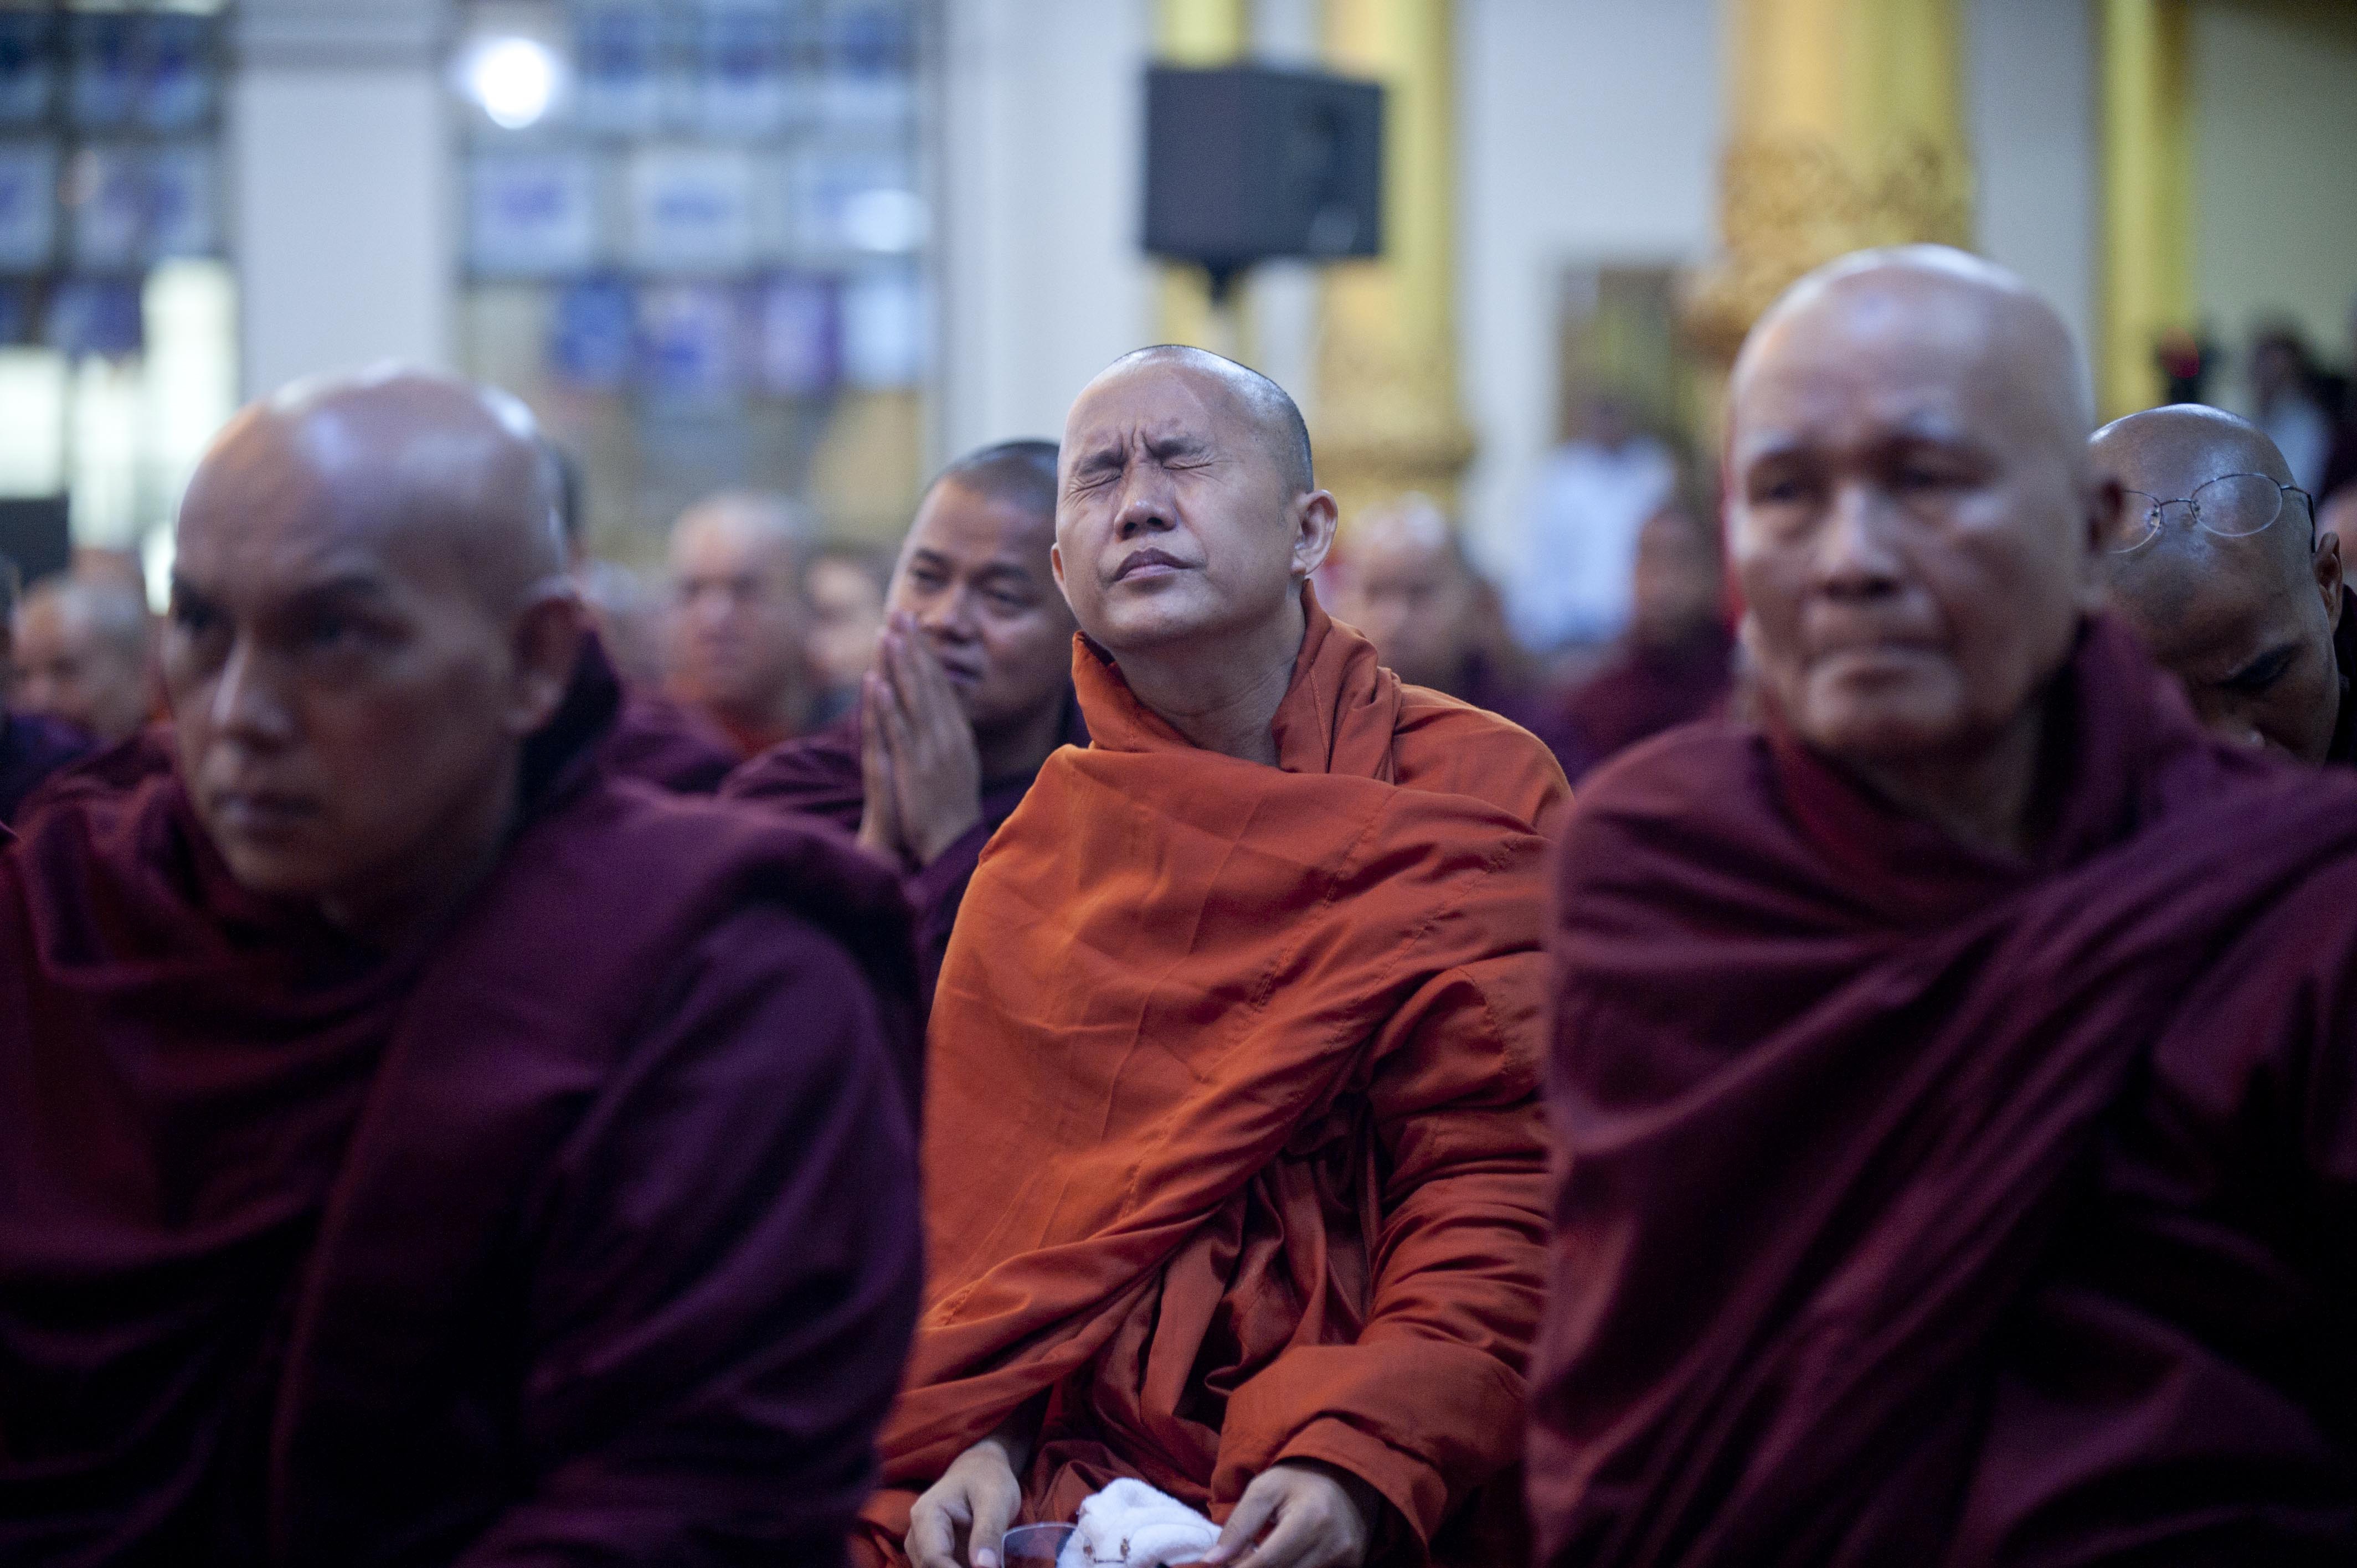 Controversial Burmese monk Wirathu, center, attends a meeting of Buddhist monks at a monastery outside Rangoon, Burma, on June 27, 2013 (AFP/Getty Images)